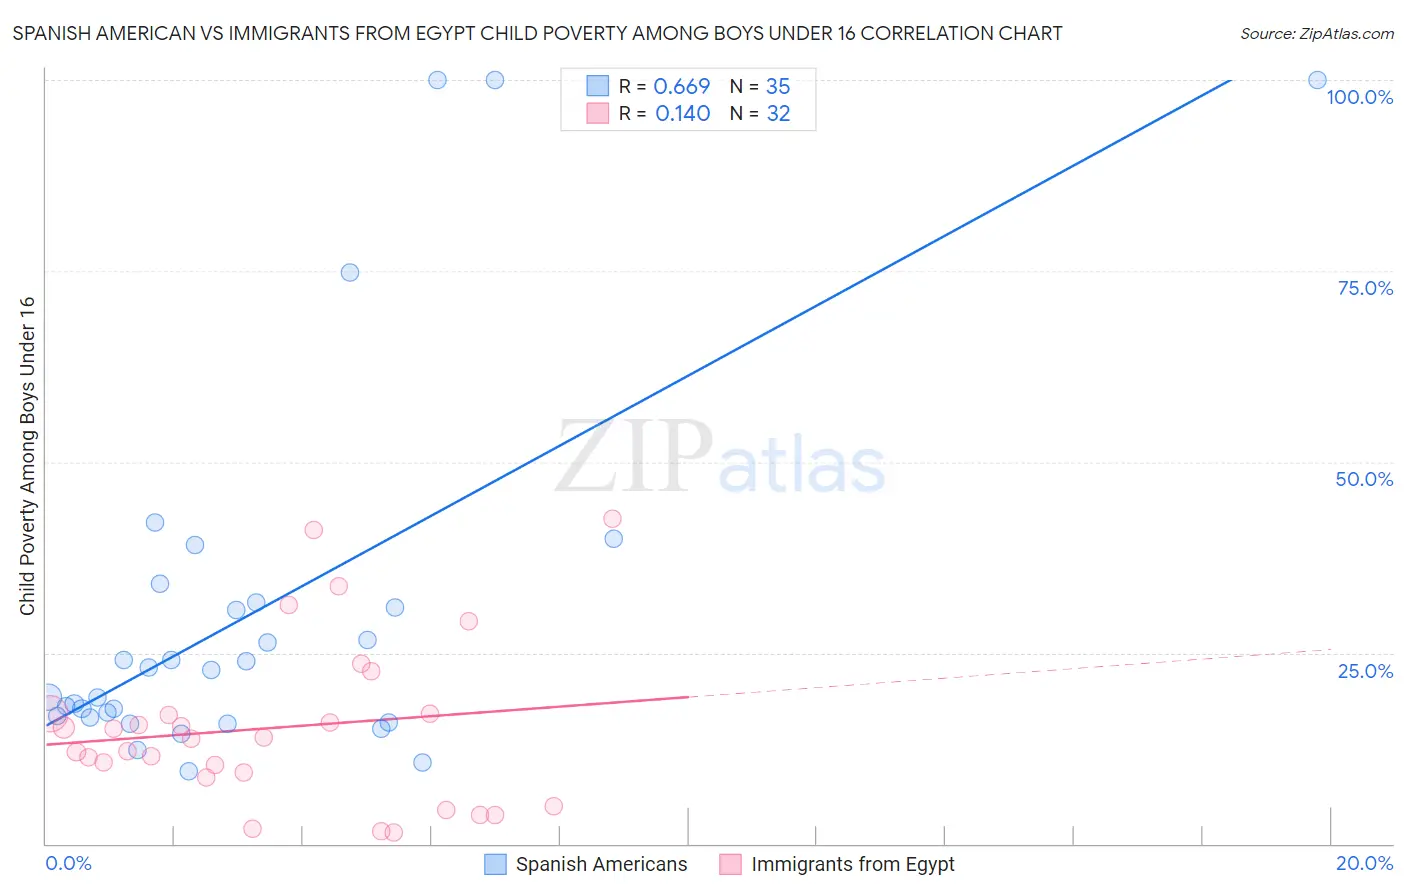 Spanish American vs Immigrants from Egypt Child Poverty Among Boys Under 16